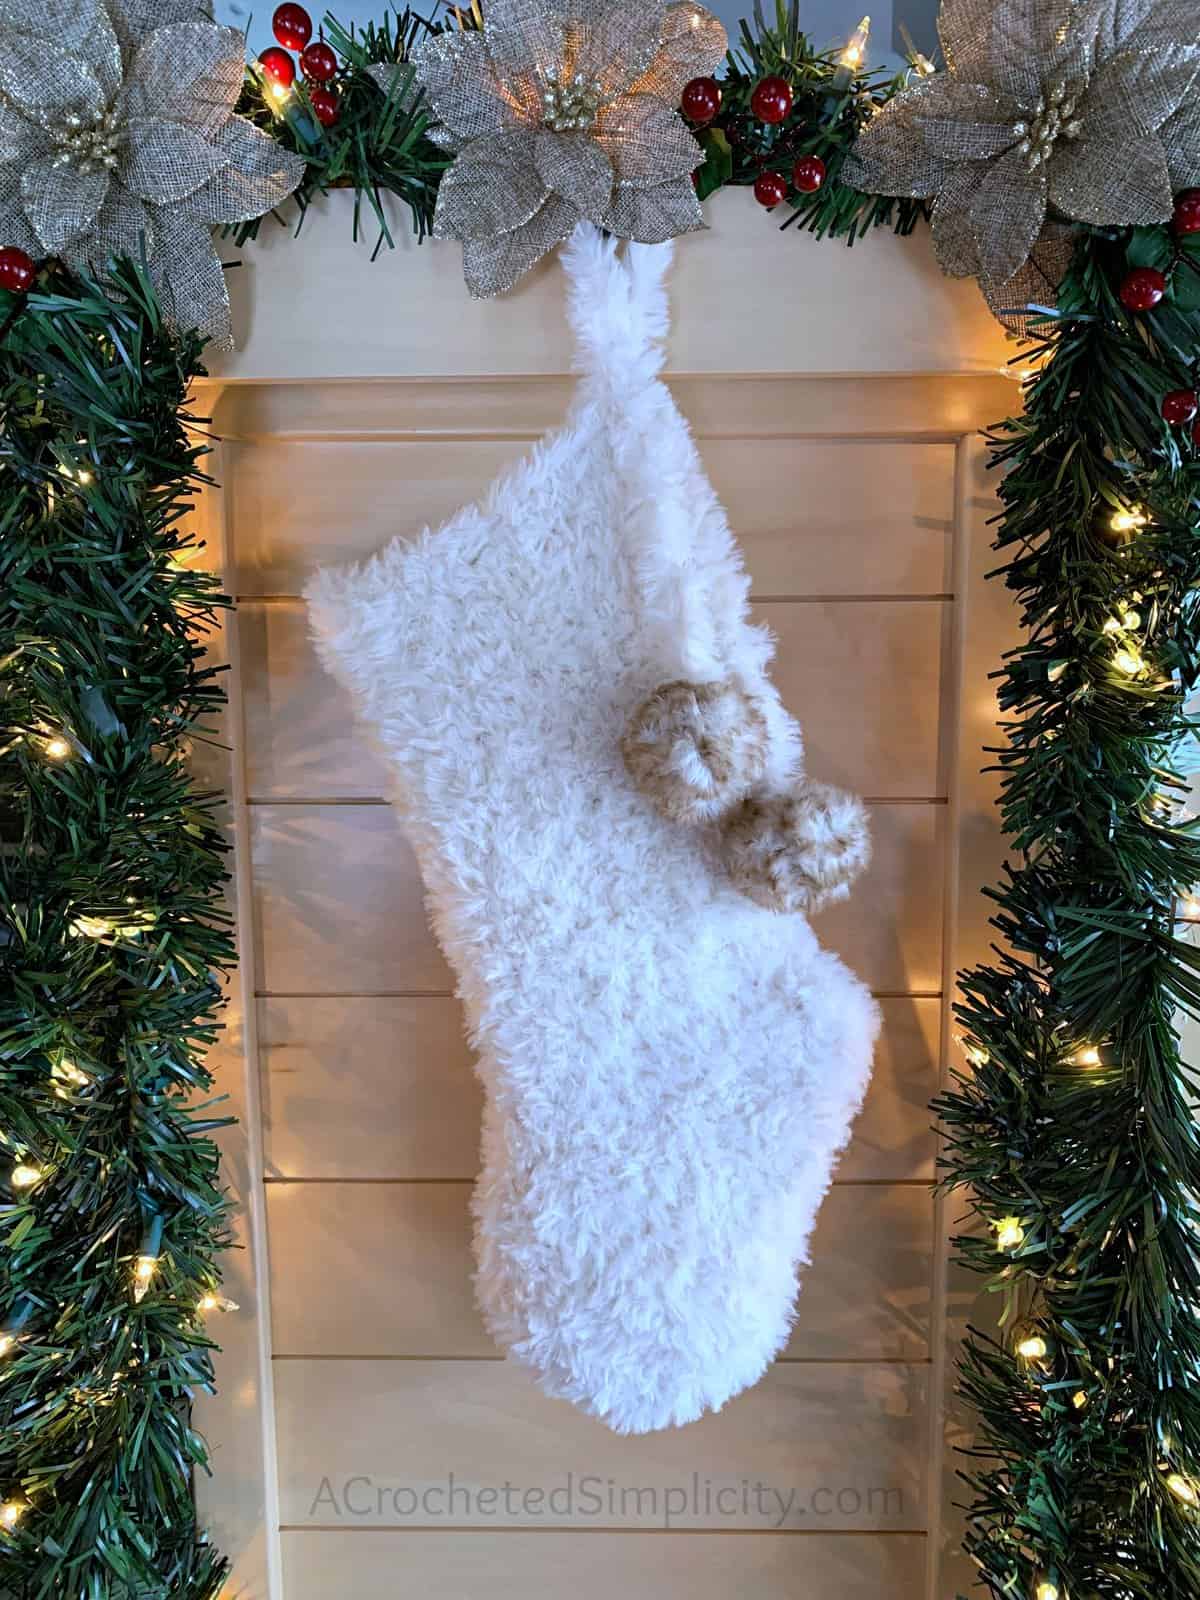 Free Crochet Pattern - Faux Fur Christmas Stocking by A Crocheted Simplicity#freecrochetstockingpattern #freecrochetpattern #crochetchristmas #christmasstockingpattern #crochet #handmadestocking